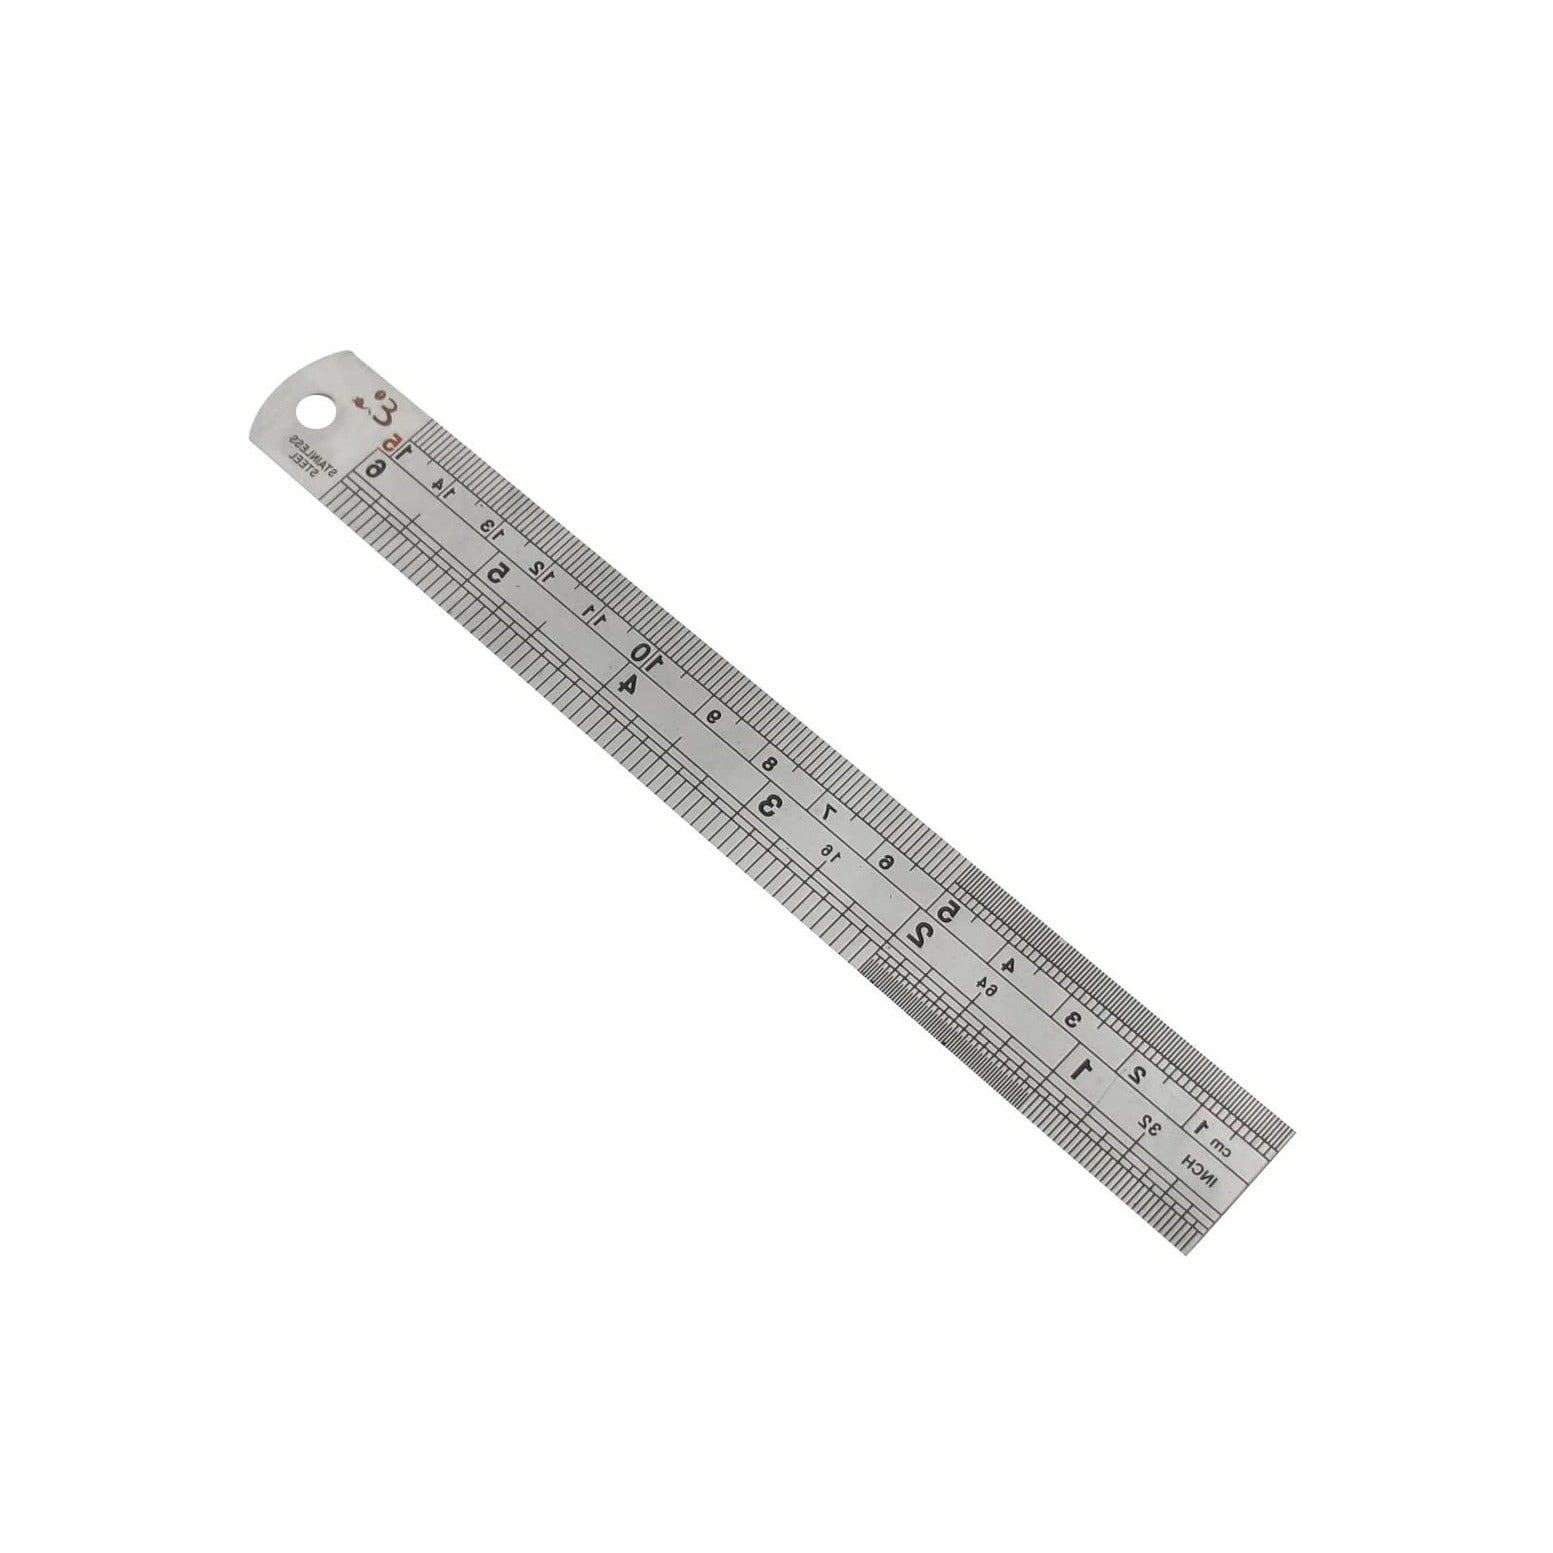 Jeweler's Steel Ruler : 6 Inches or 150mm